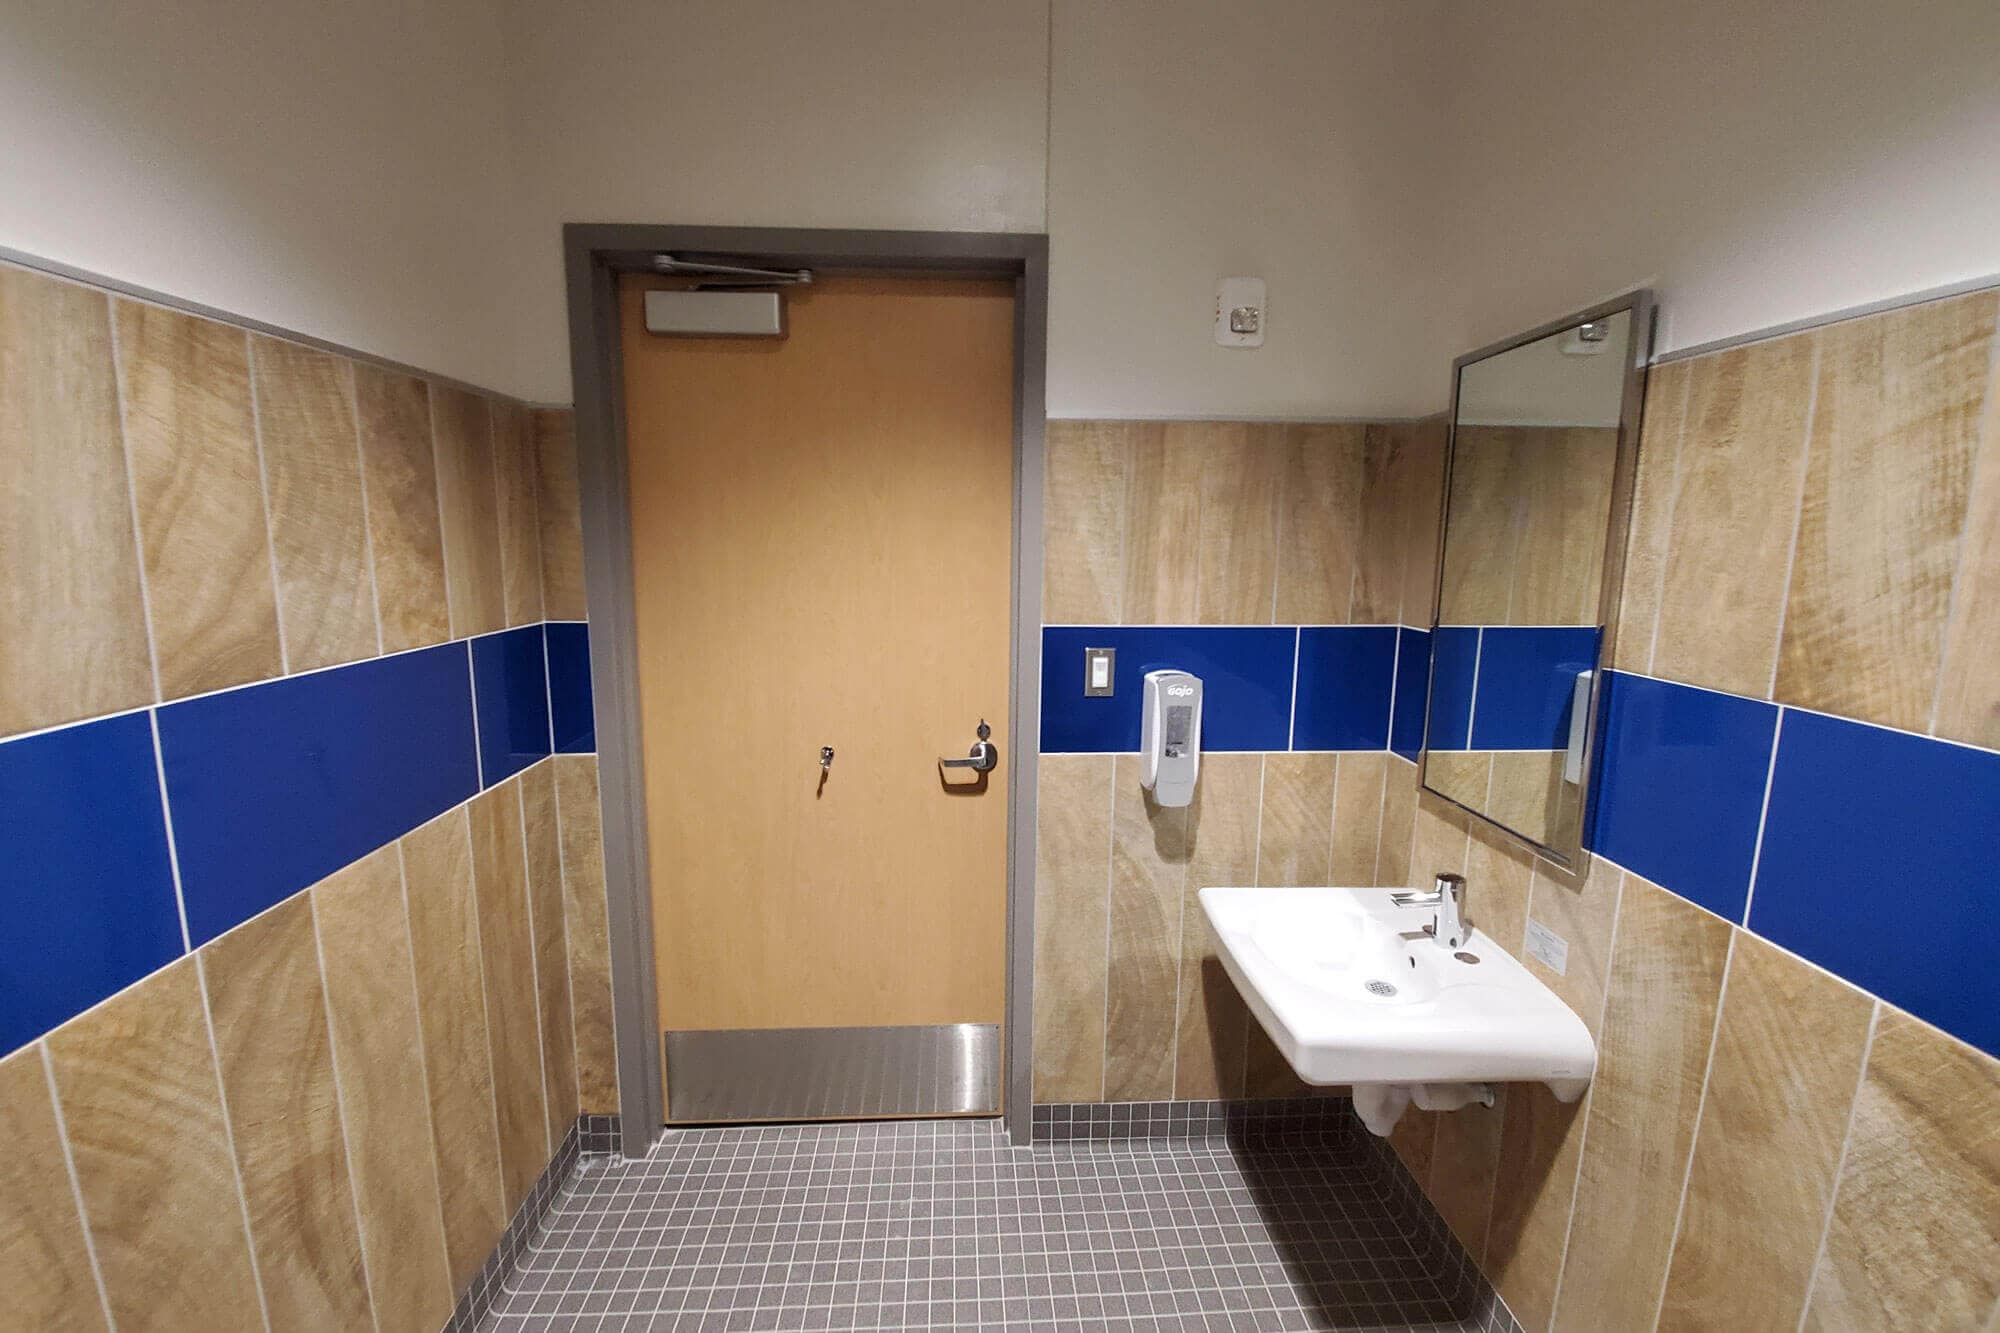 Bathroom with tan and blue tiling